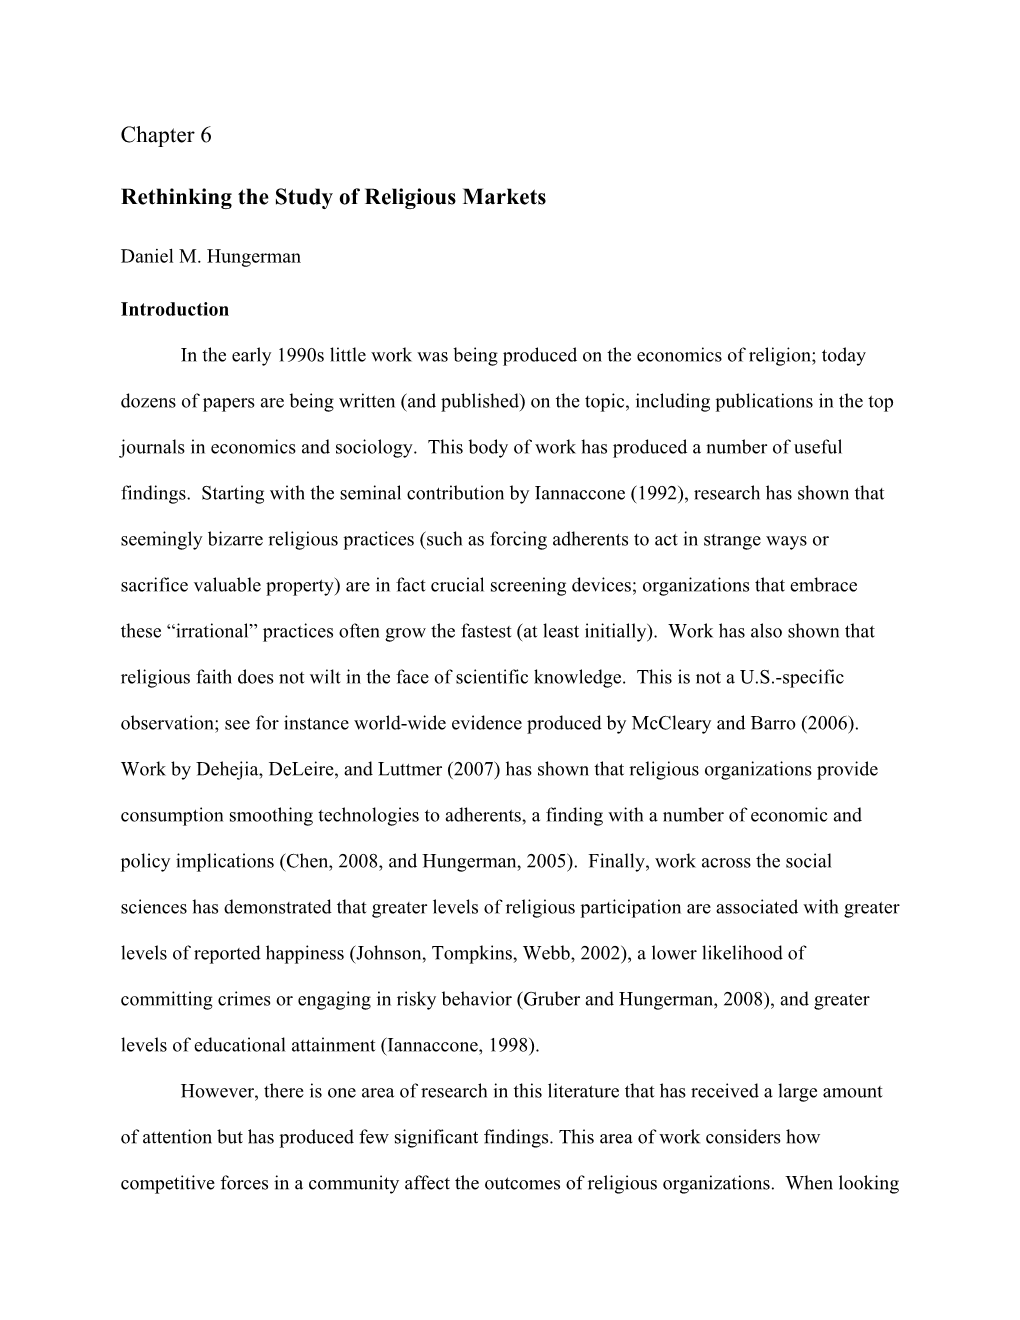 Chapter 6 Rethinking the Study of Religious Markets